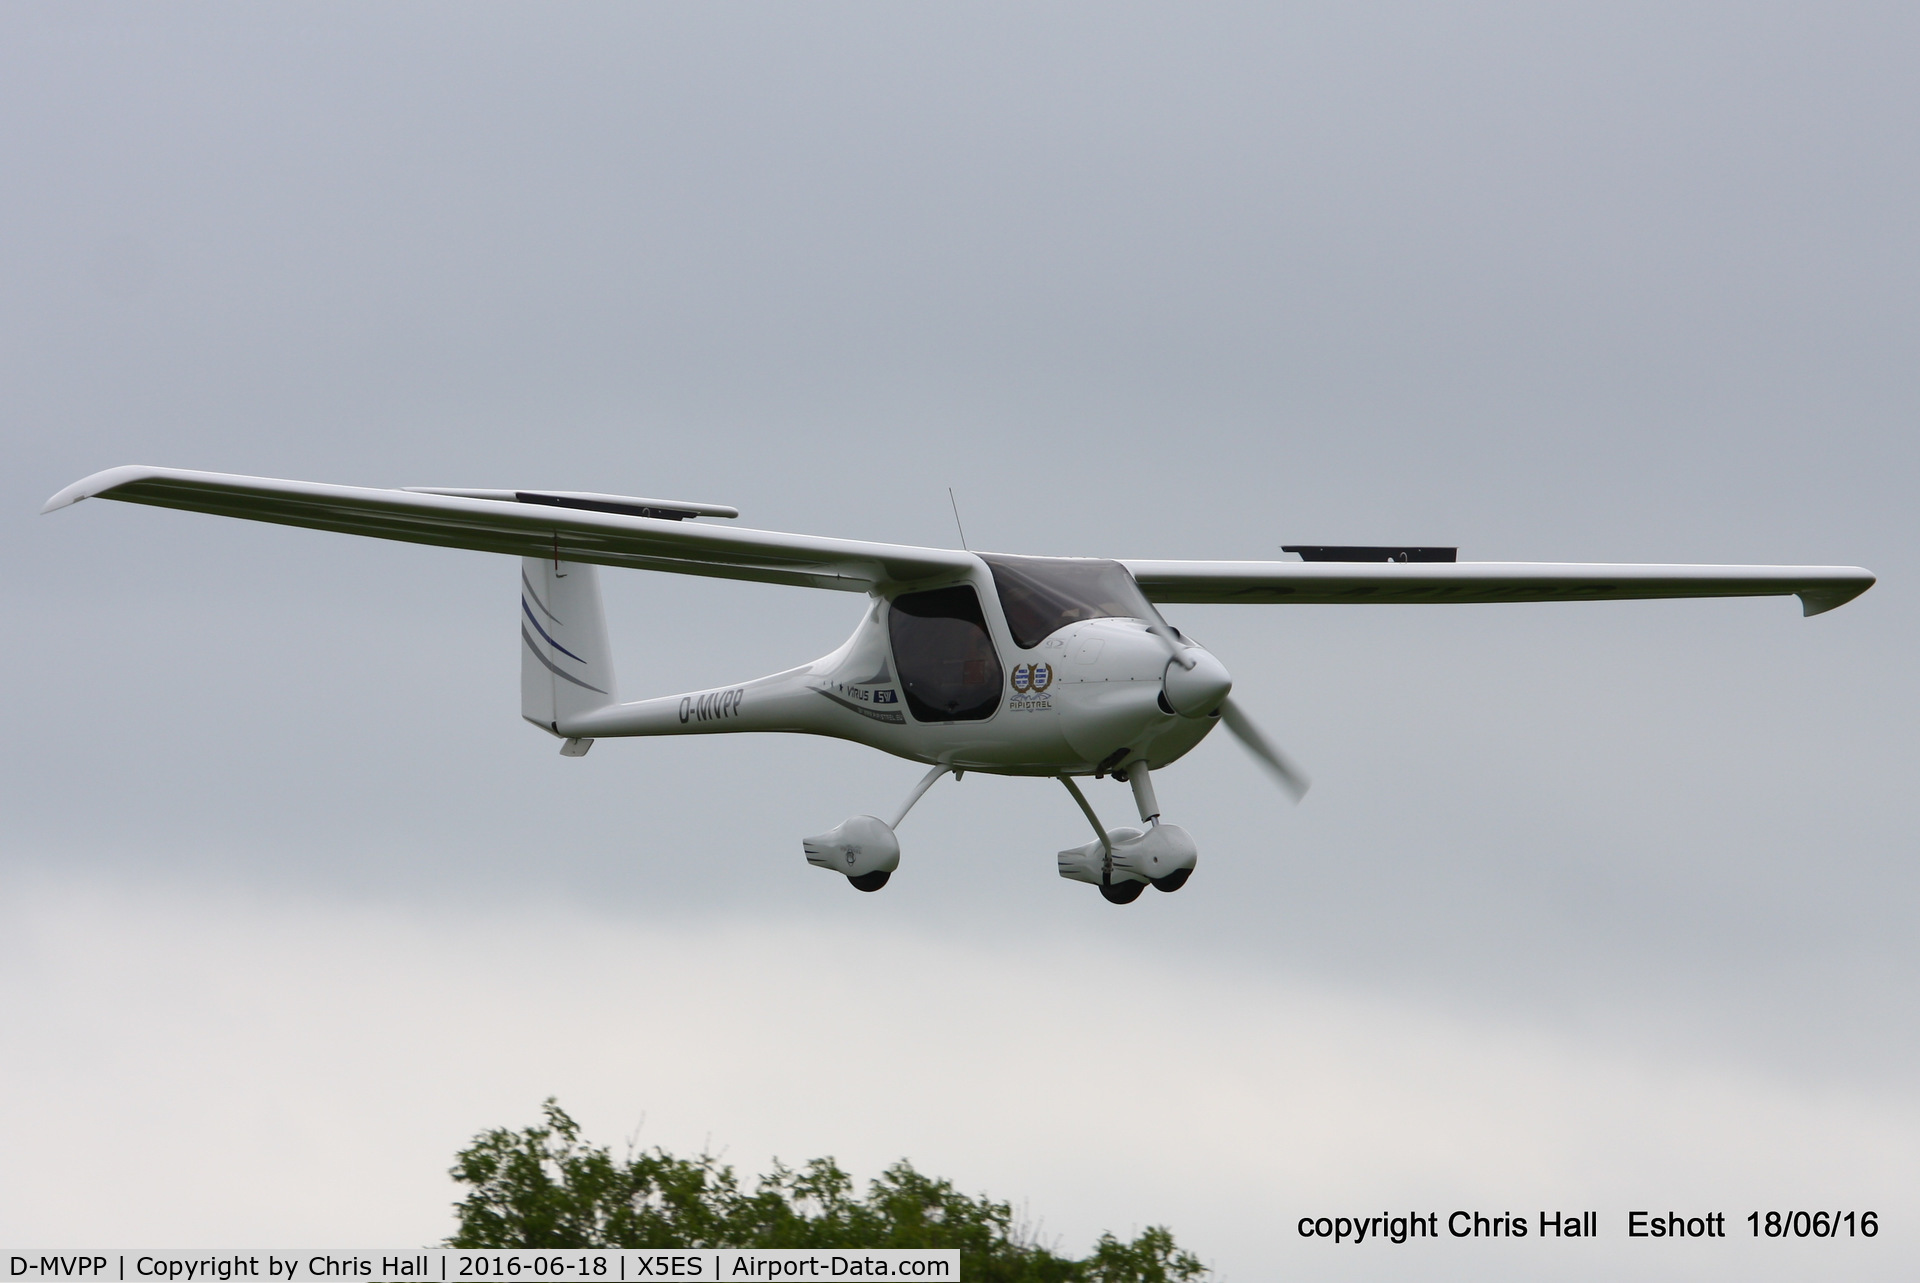 D-MVPP, 2013 Pipistrel Virus SW C/N 524 SWN 80, at the Great North Fly in. Eshott